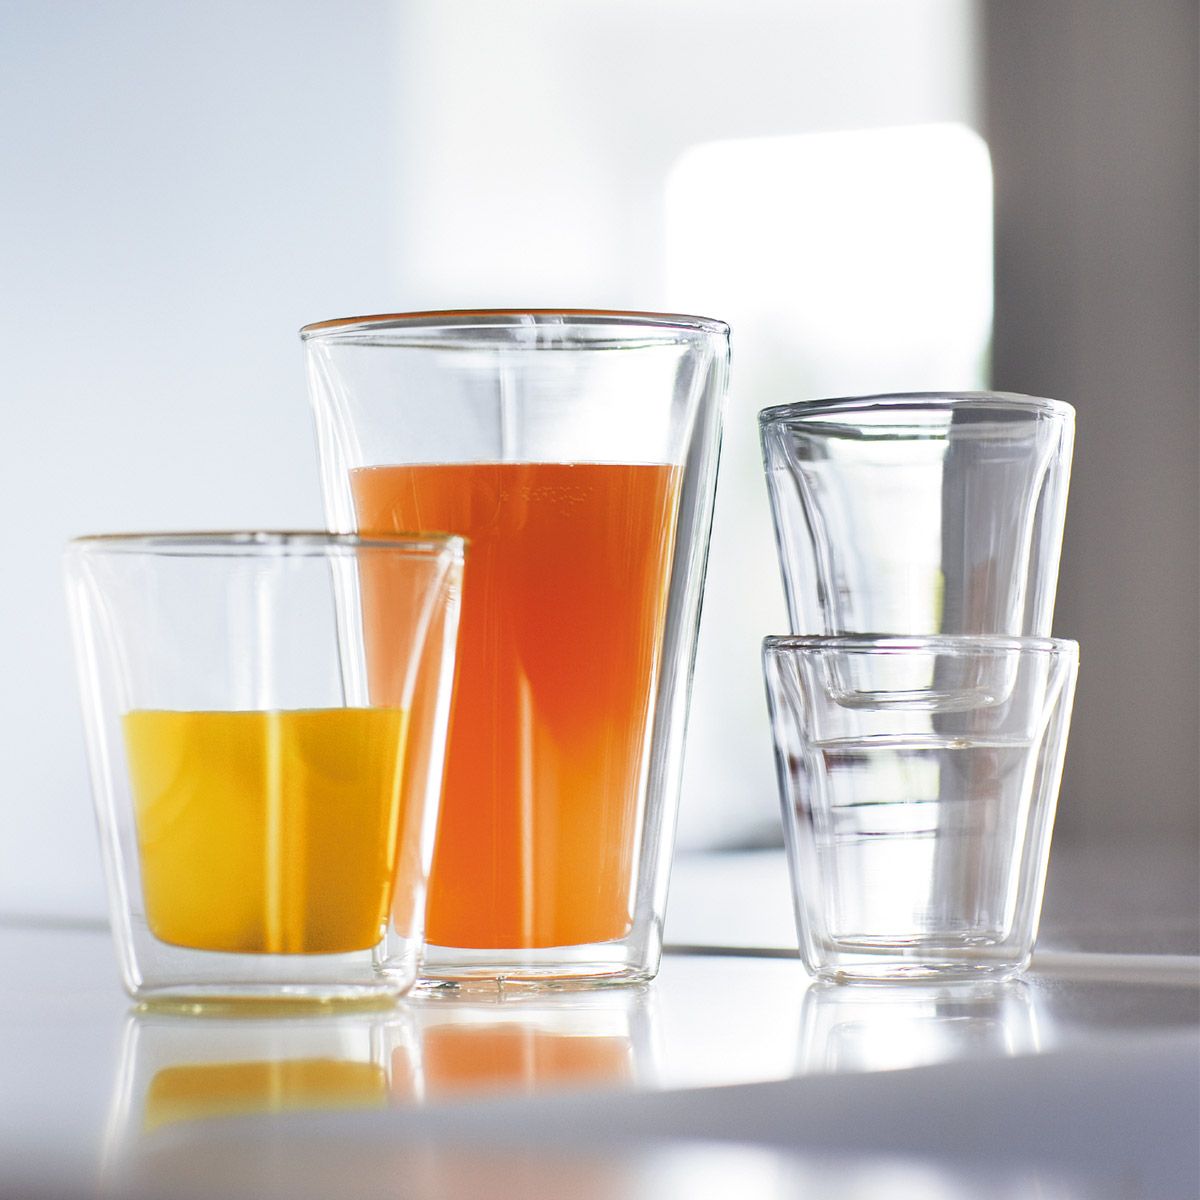 Double Wall Glasses CANTEEN - 2 pieces set 0.2 L